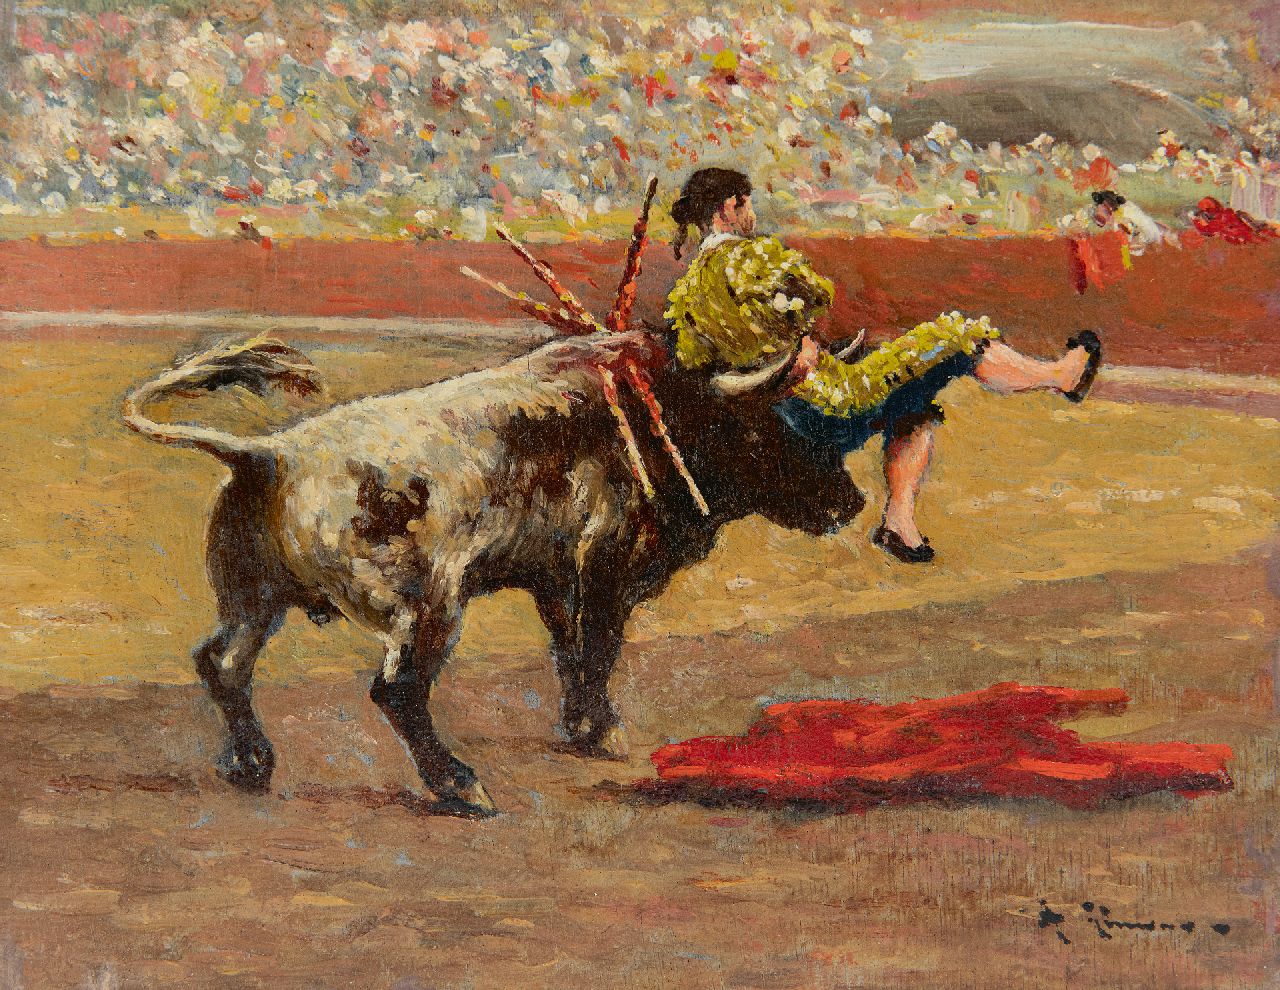 Gimeno A.  | Andrés Gimeno | Paintings offered for sale | The bullfight, oil on panel 14.2 x 18.1 cm, signed l.r.